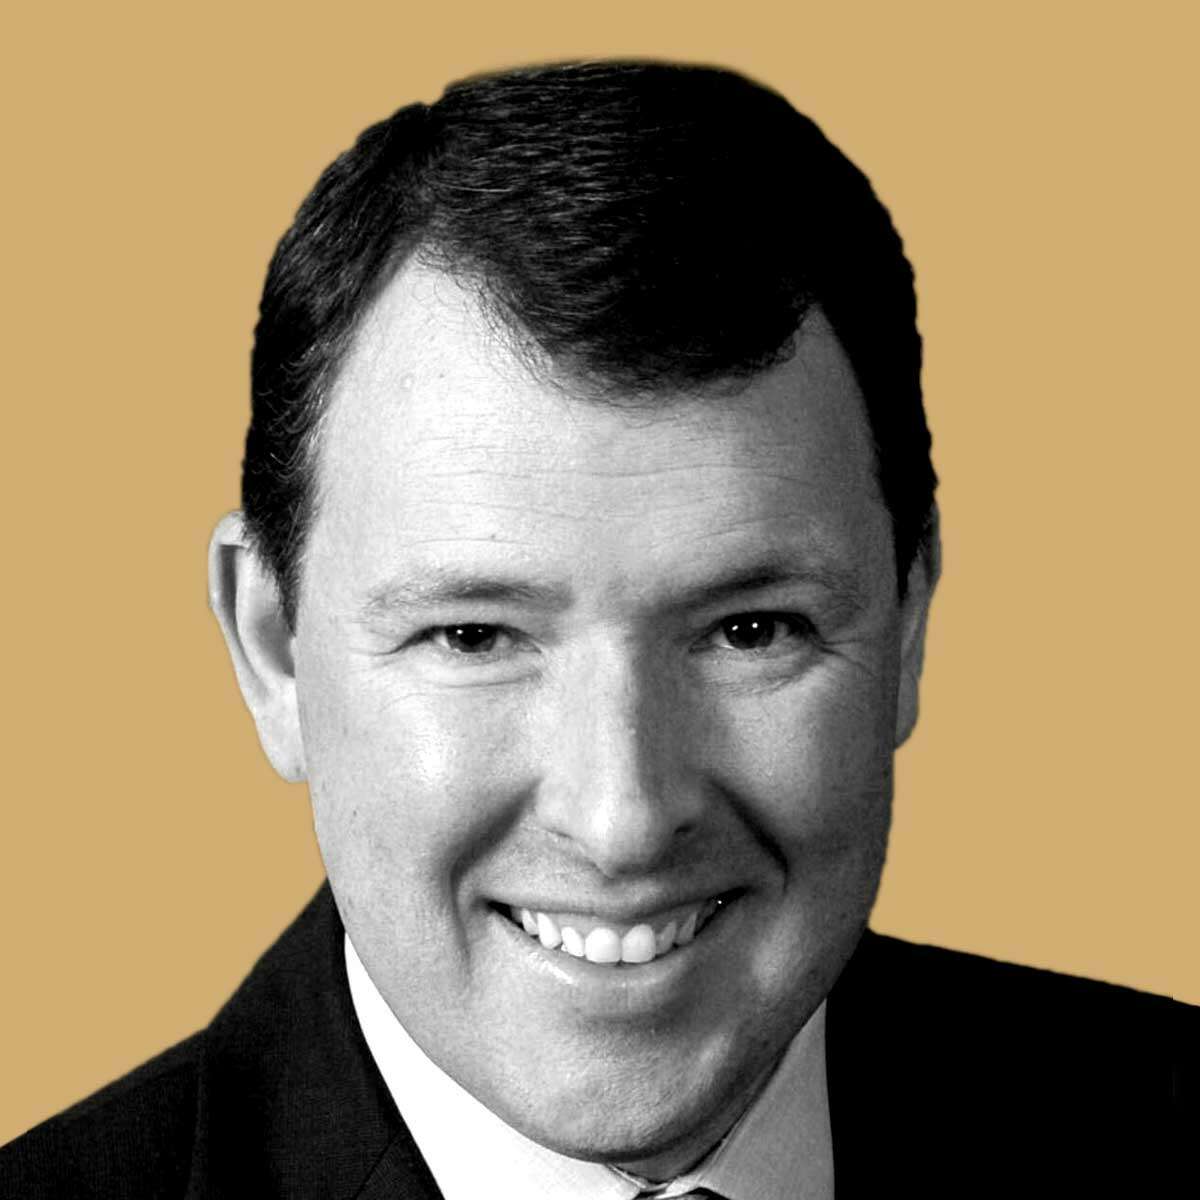 Marc Thiessen writes a twice-weekly column for The Post on foreign and domestic policy. He is a fellow at the American Enterprise Institute, and the former chief speechwriter for President George W. Bush.